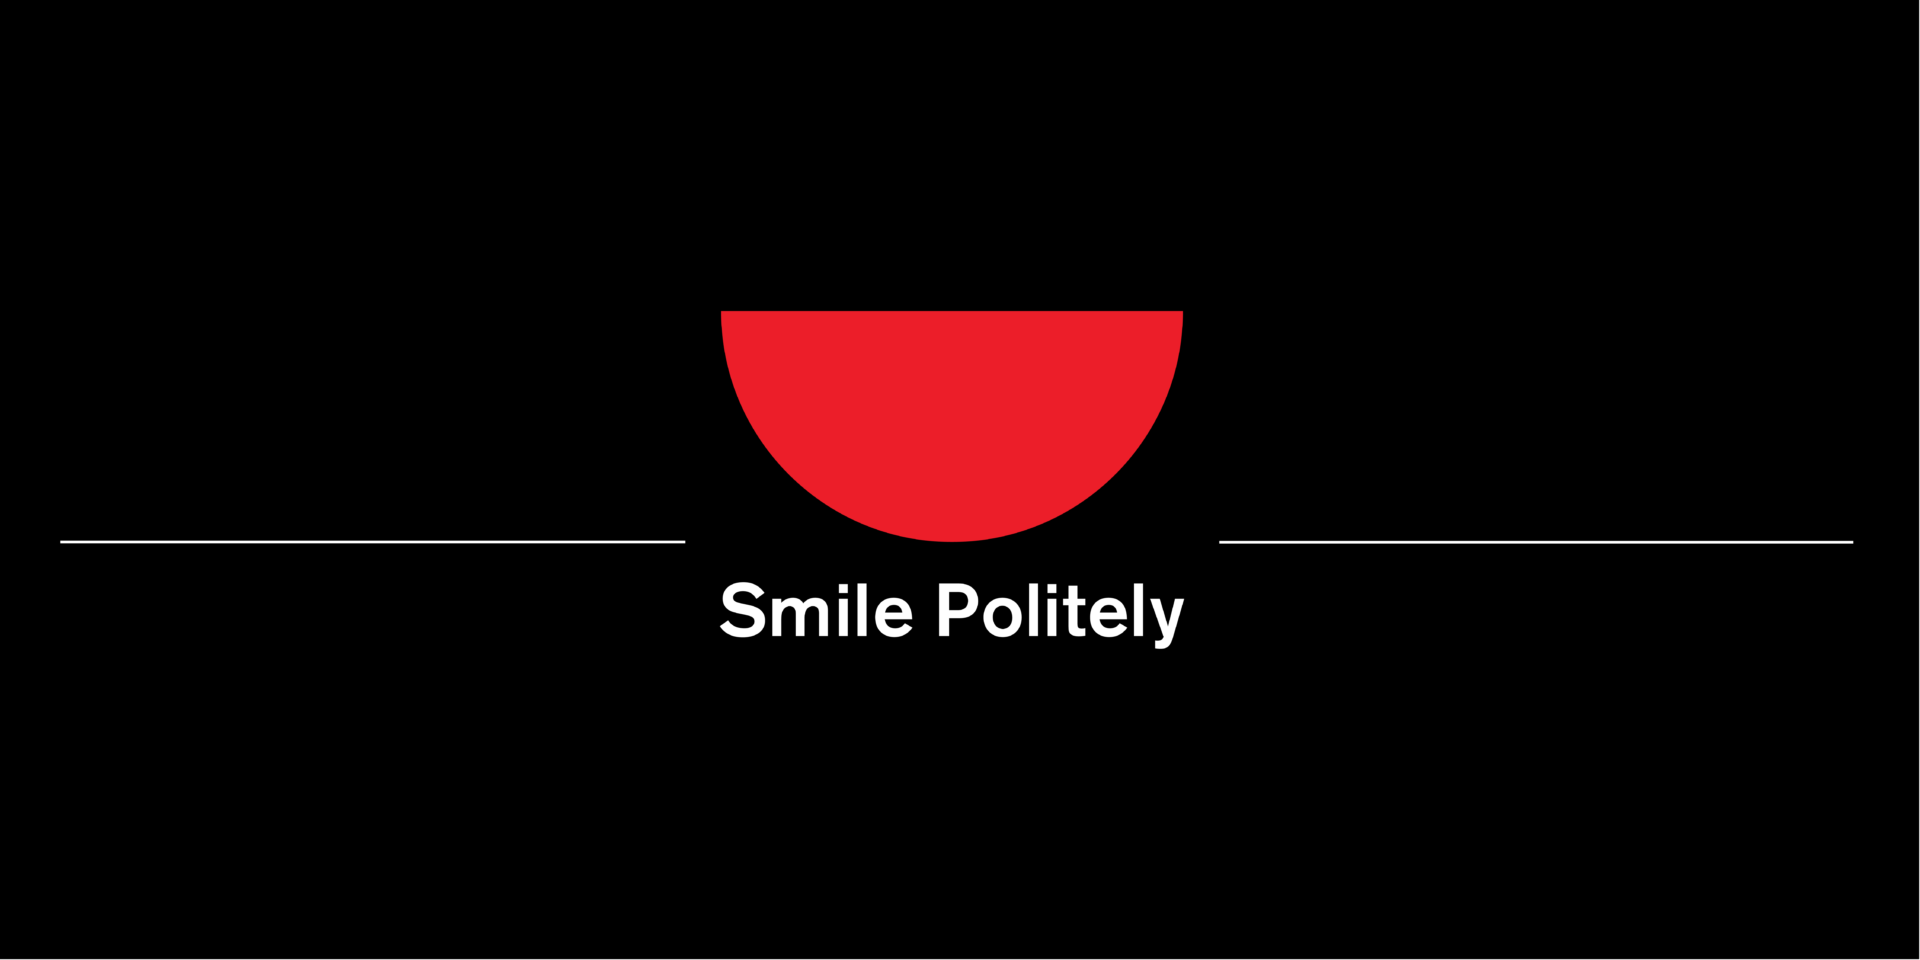 A white and red Smile Politely logo on a black backdrop